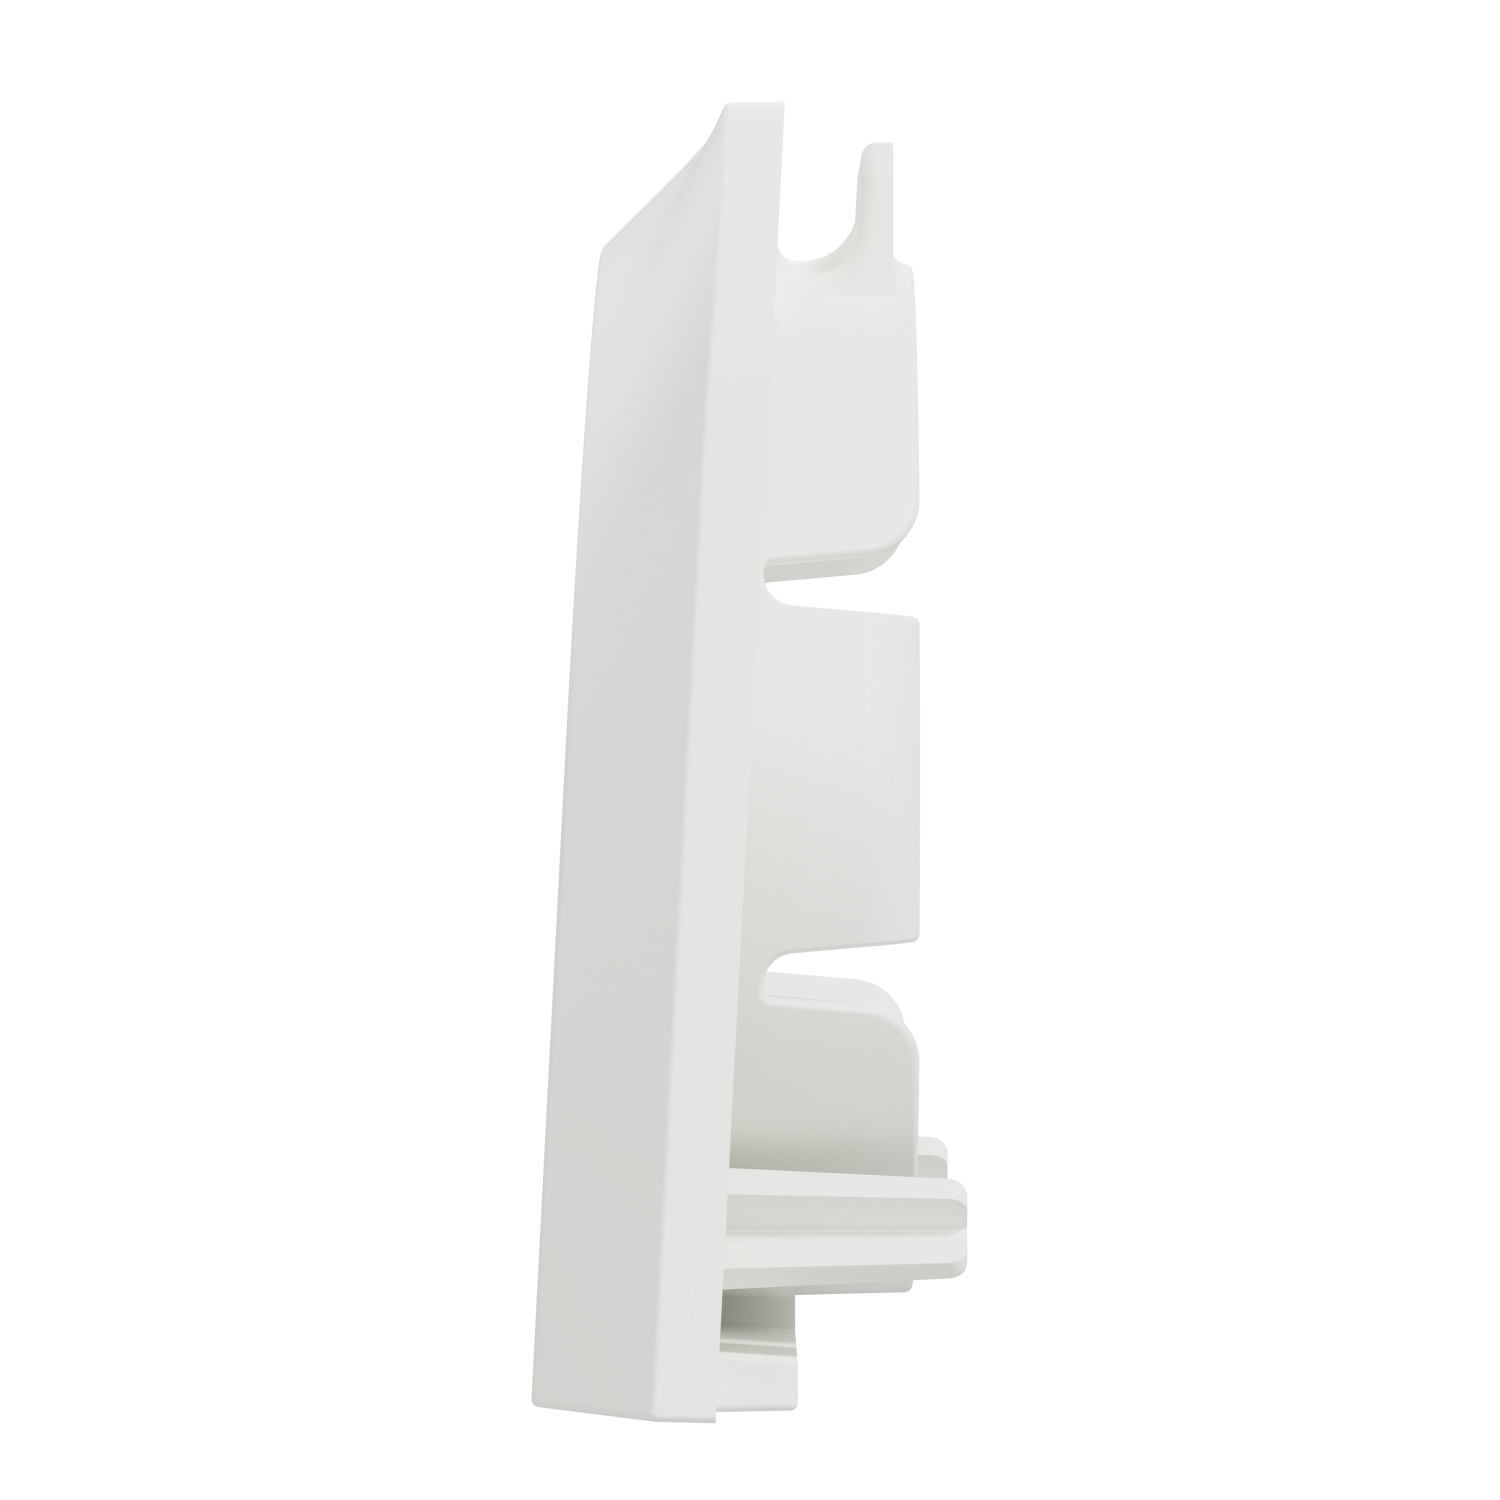 PDLO300CE-25 - PDL Iconic Outdoor Conduit Adaptor 25mm - White